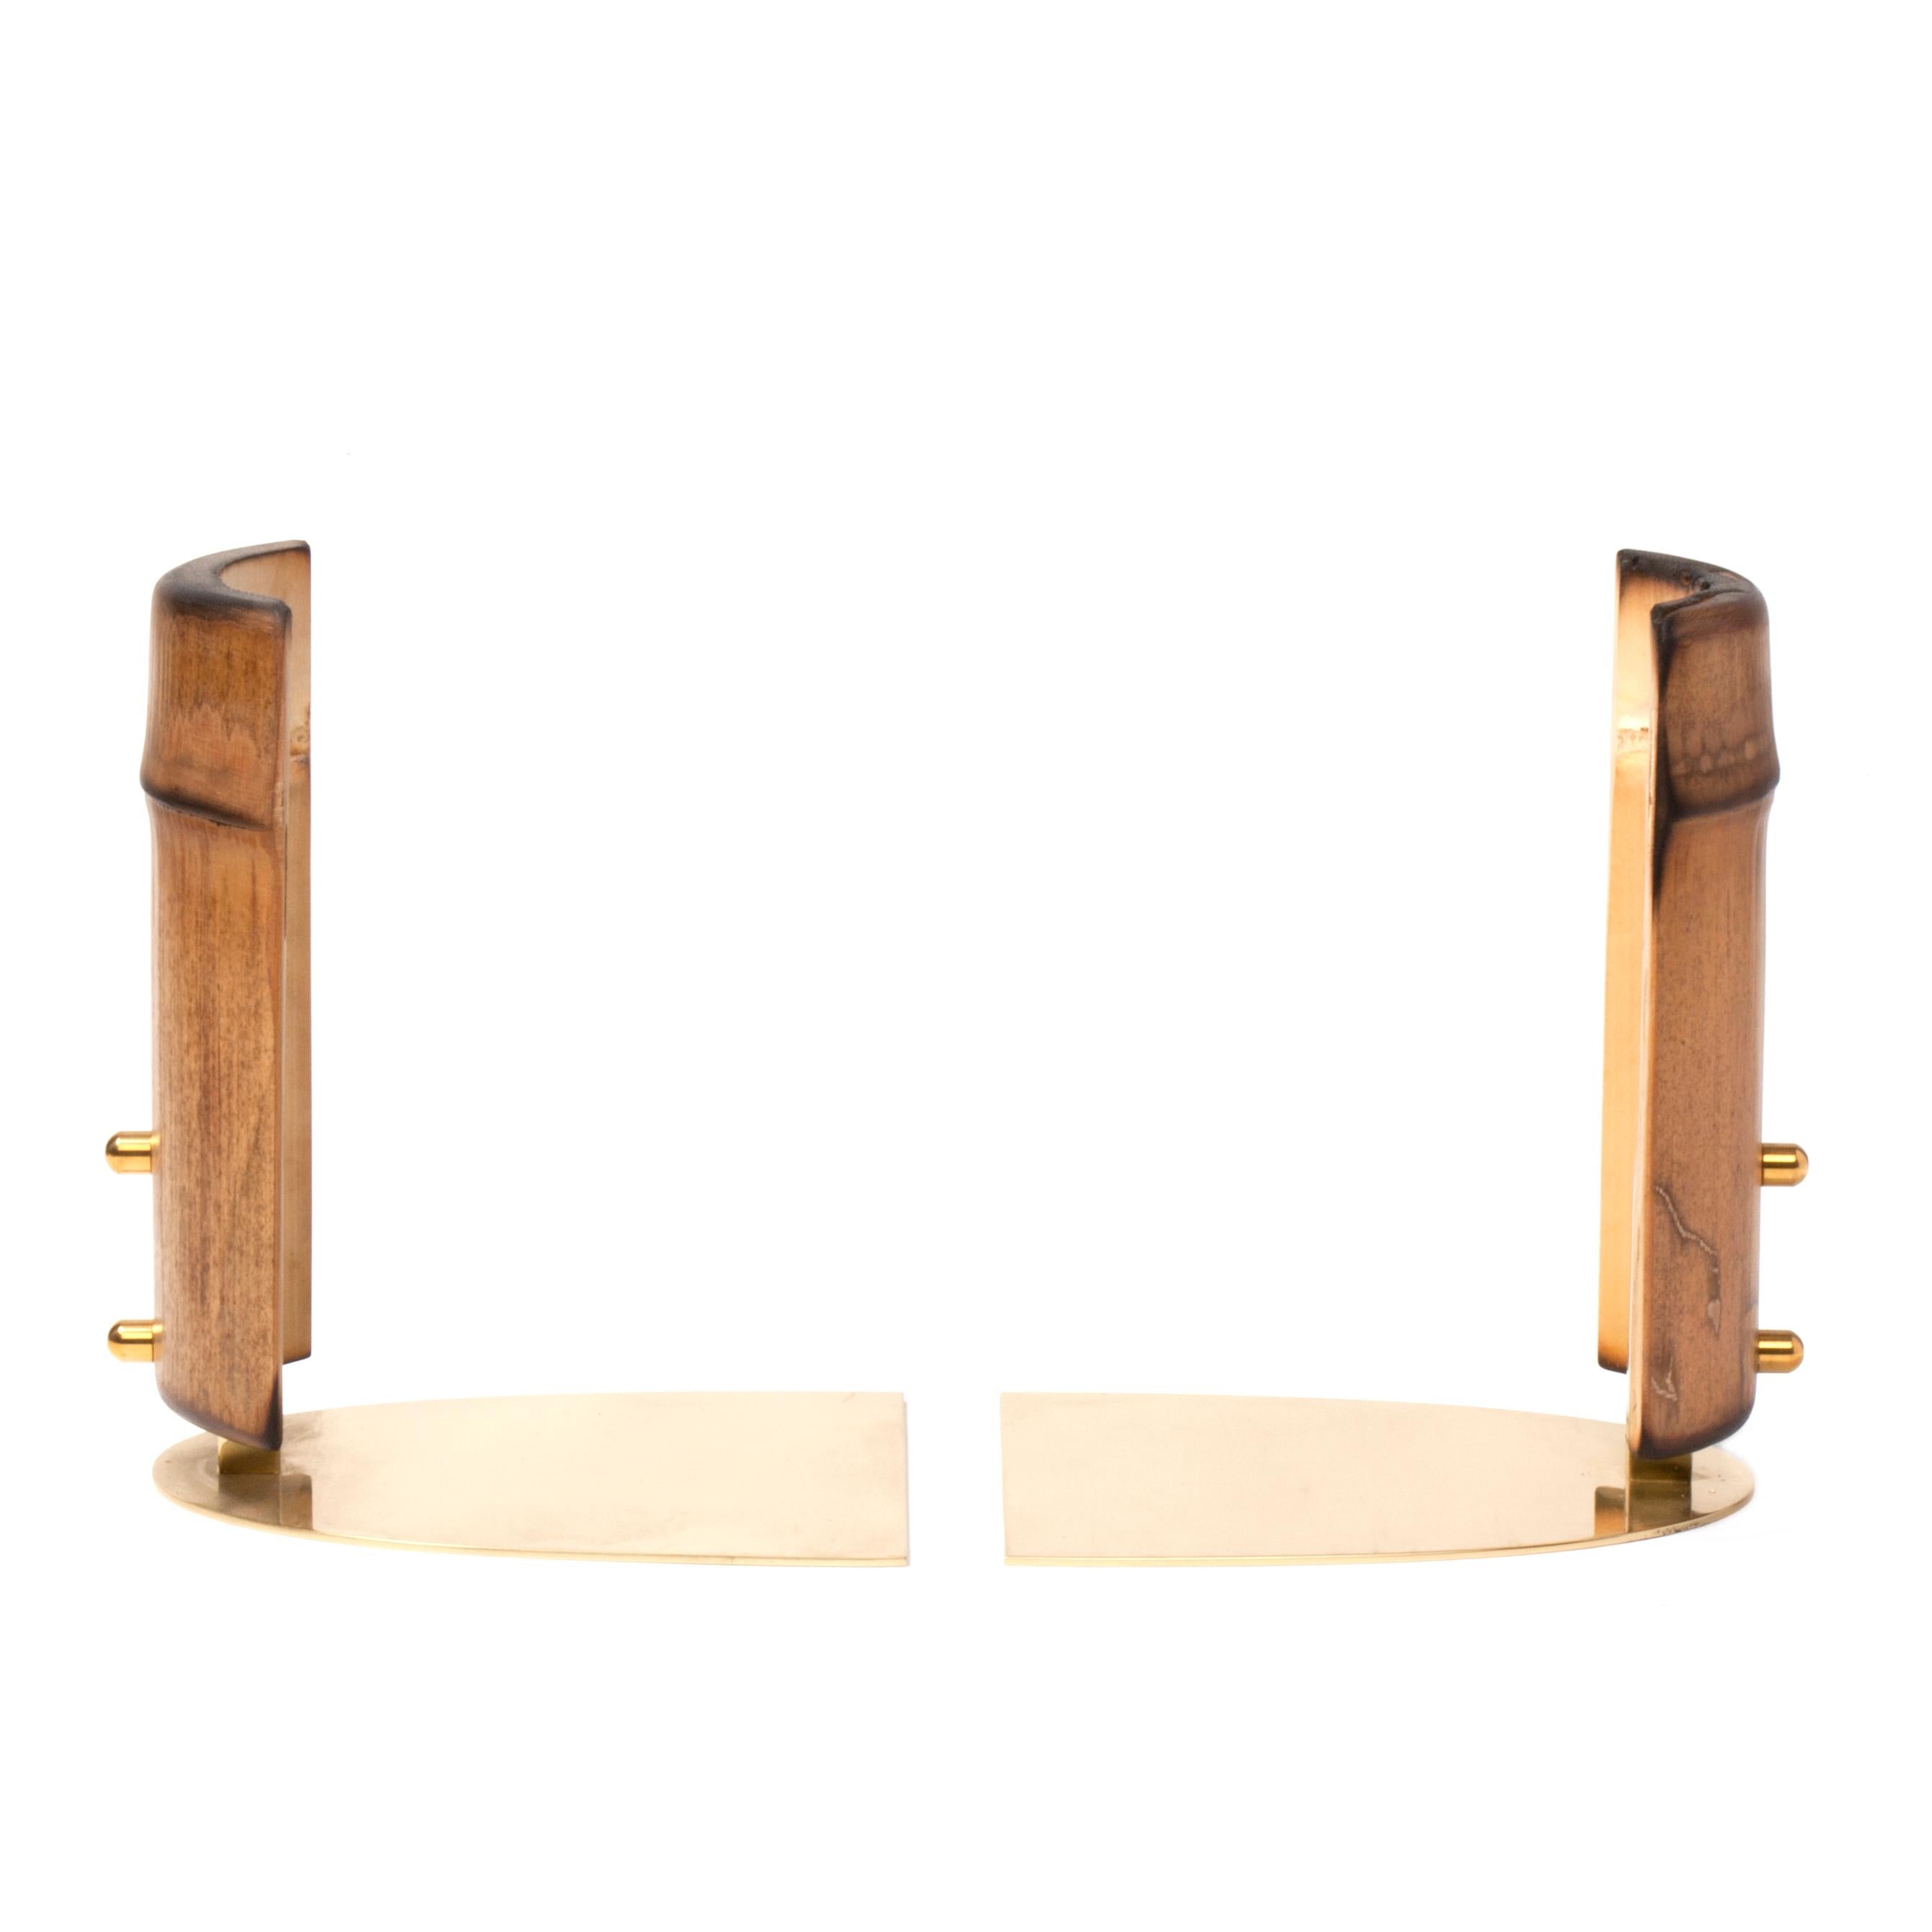 Mid-Century Modern Carl Auböck Pair of Bookends #1937 For Sale